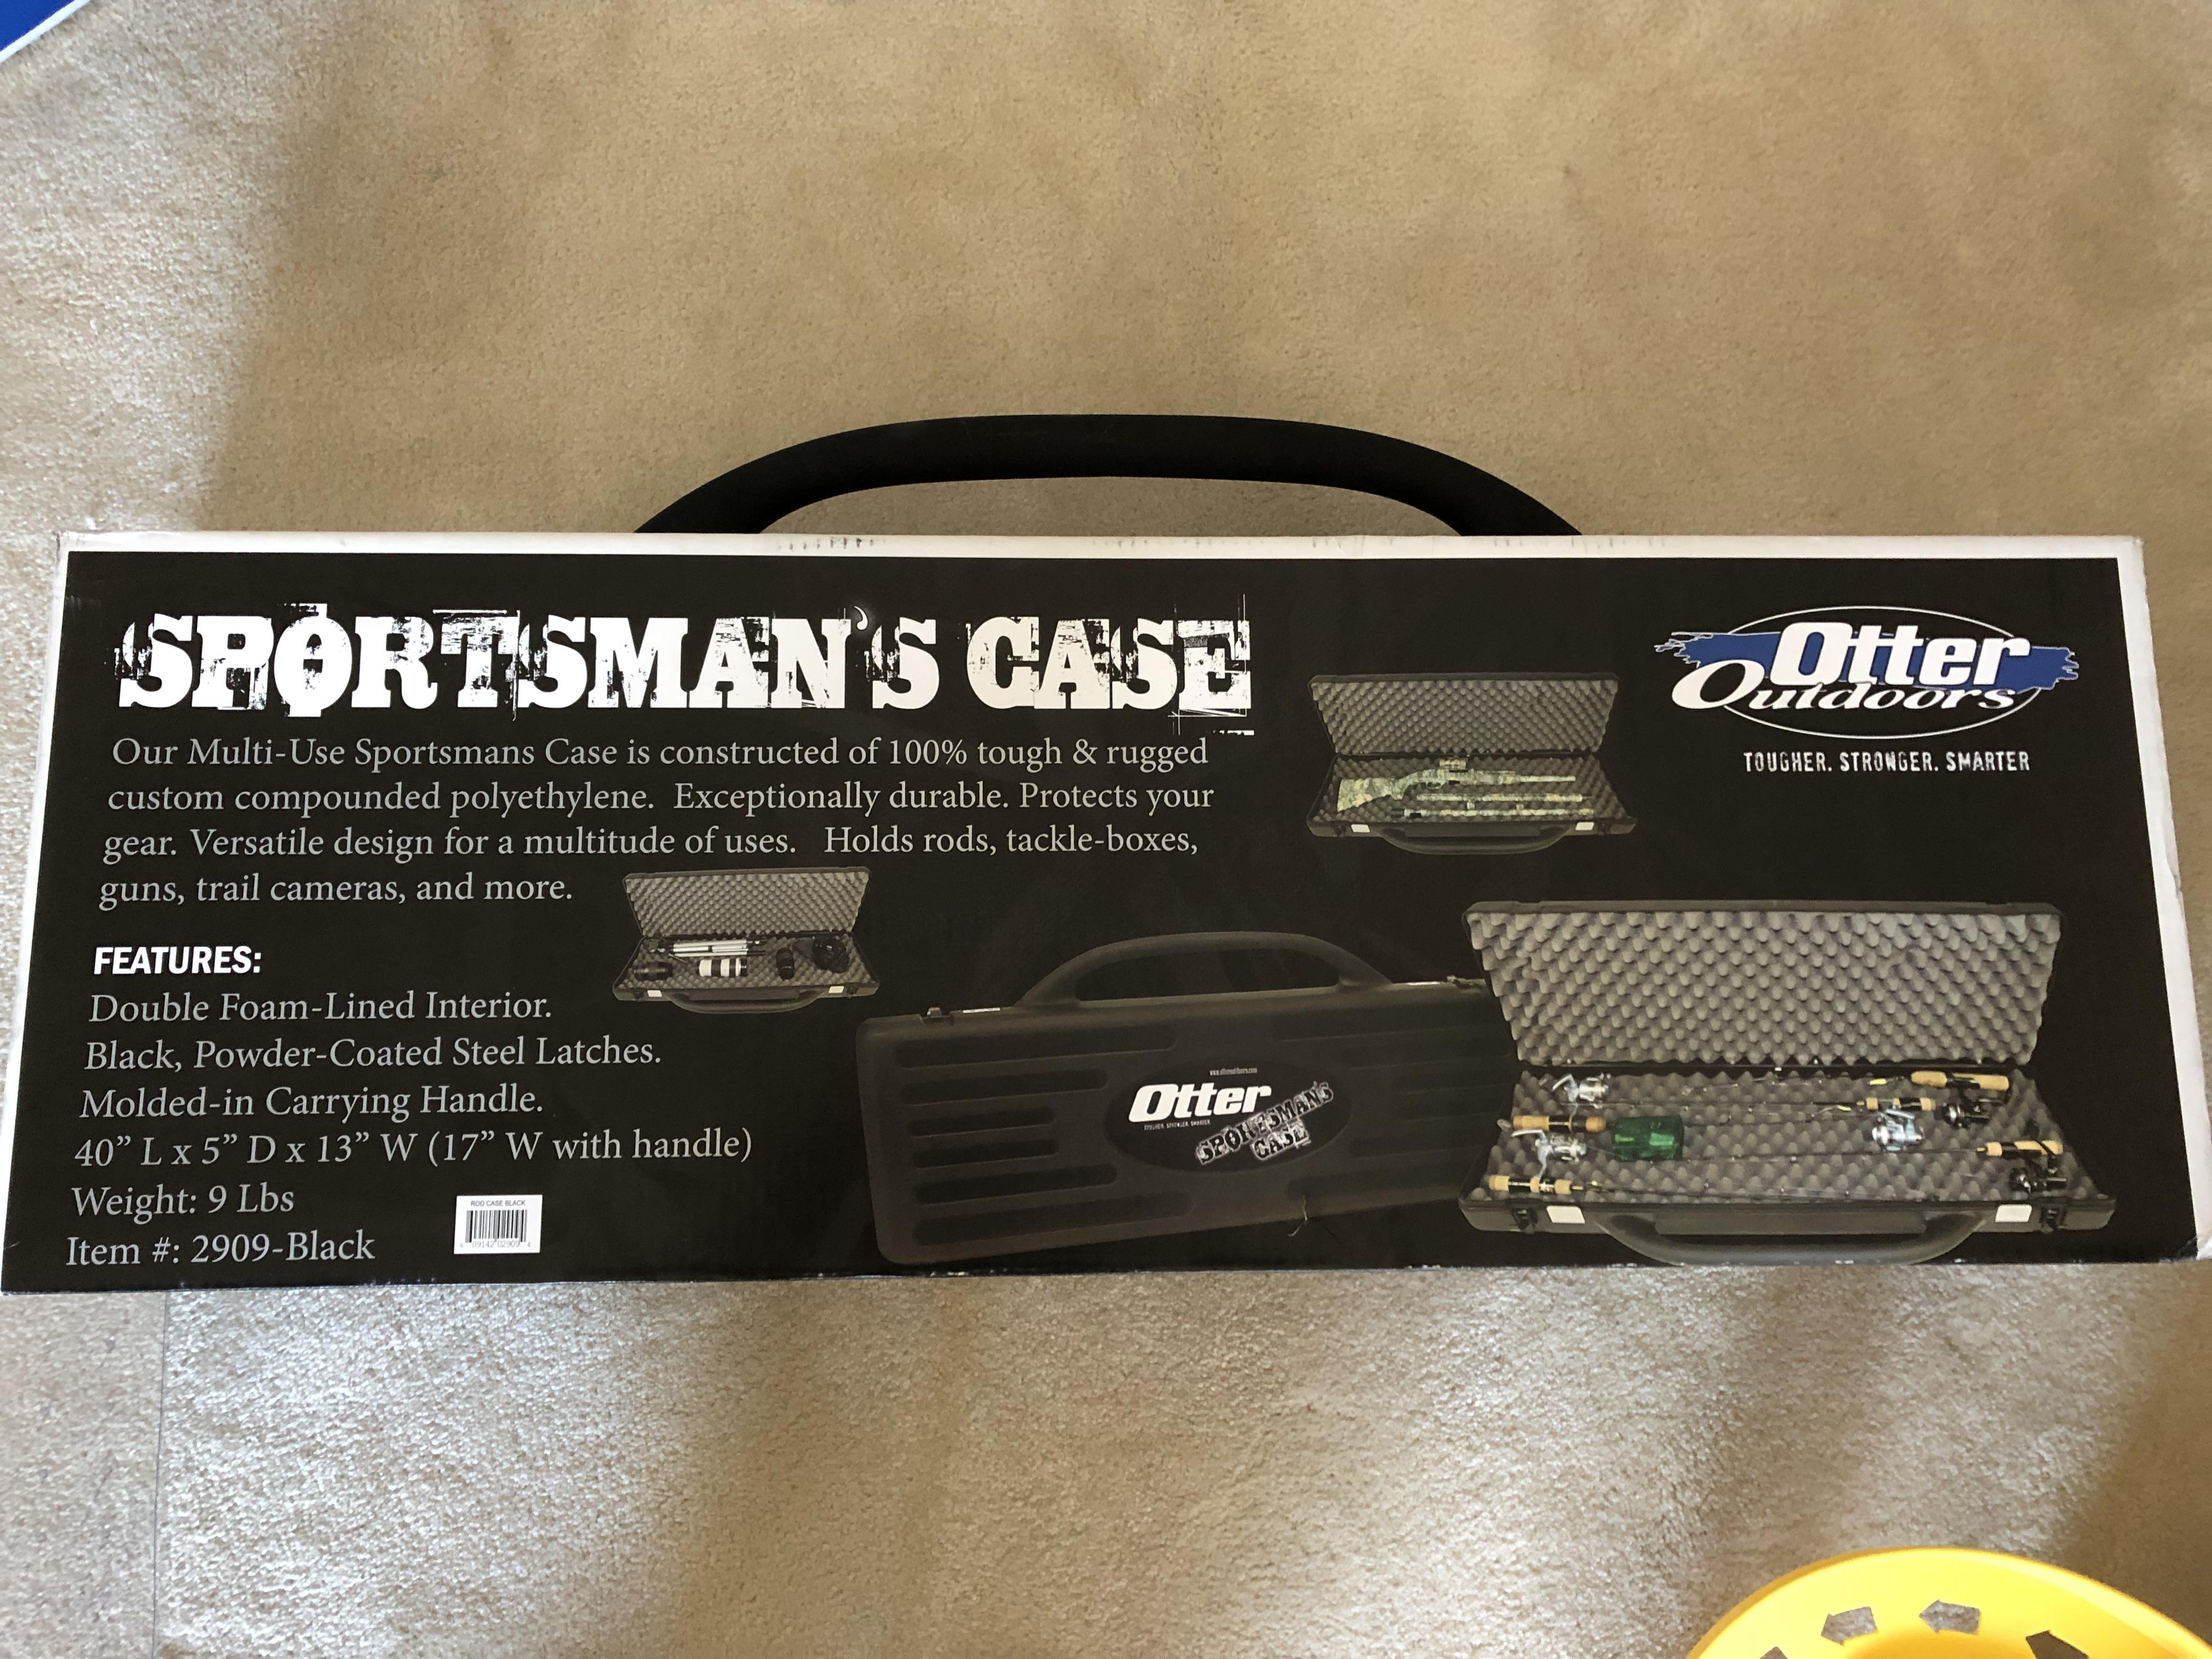 Otter Sportsman's Rod Case - Brand New - FREE LISTING-FOR SALE